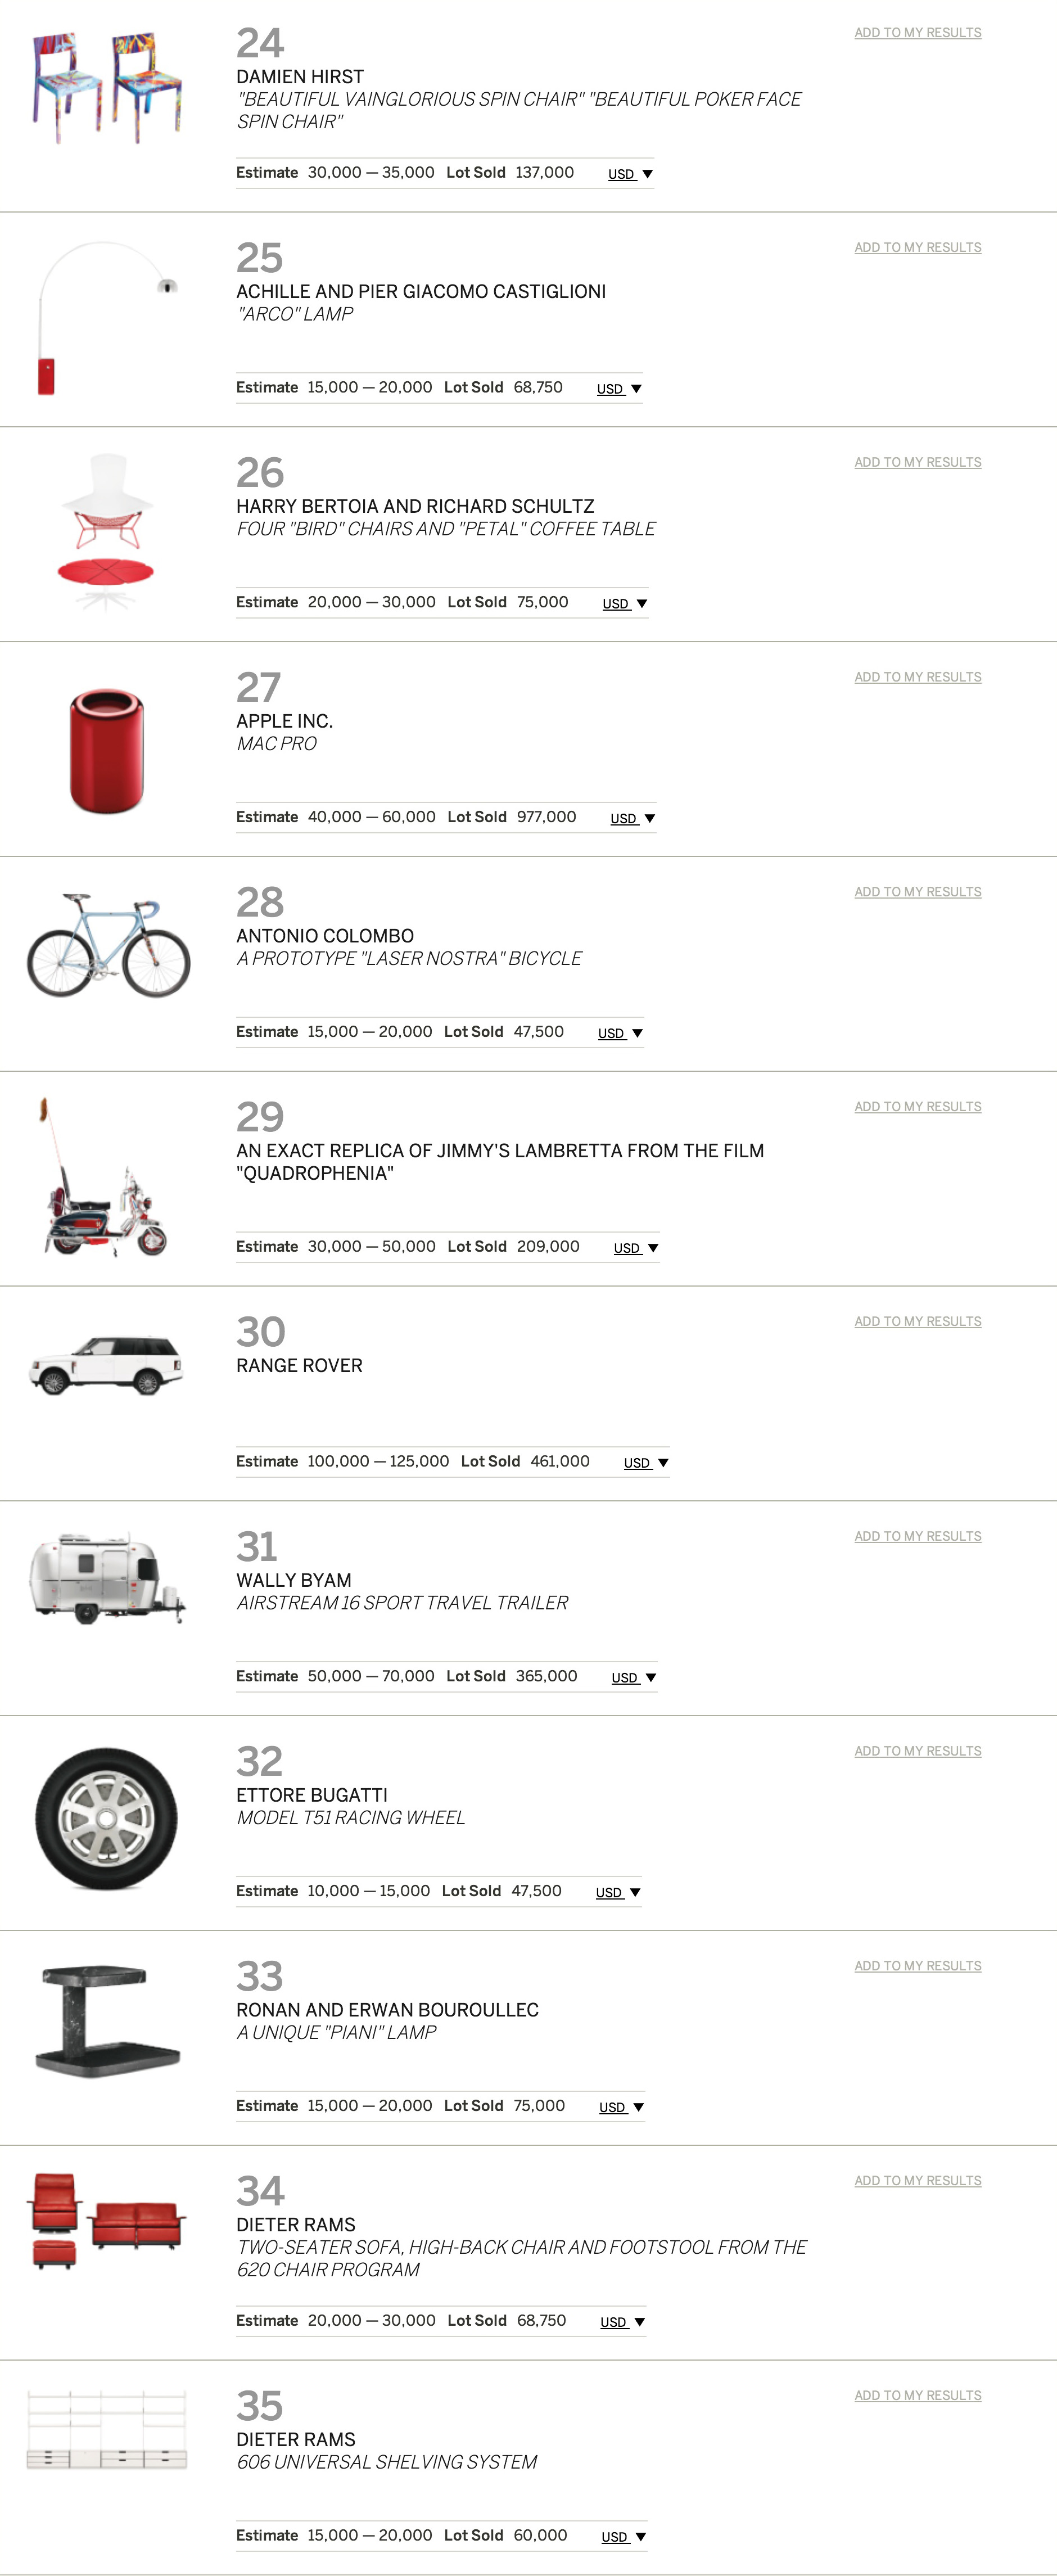 Mac Pro Sells for $977,000, Apple Earpods Sell for $461,000 at (RED) Charity Auction